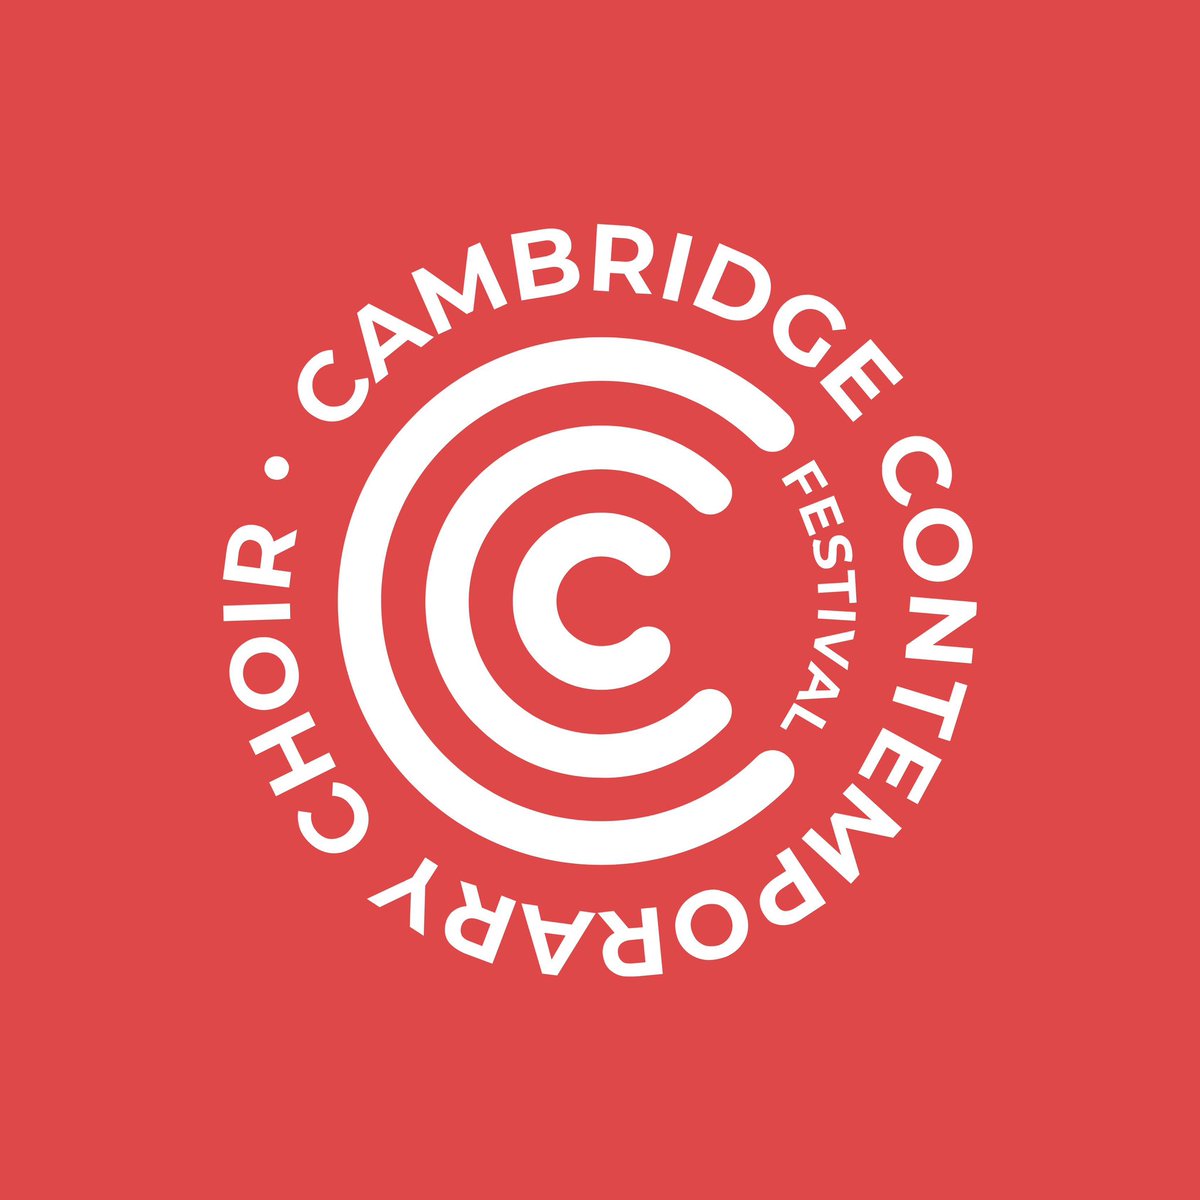 We can’t wait to take part in this new event next month at @CambridgeCornEx Read about it here: inyourarea.co.uk/news/cambridge…